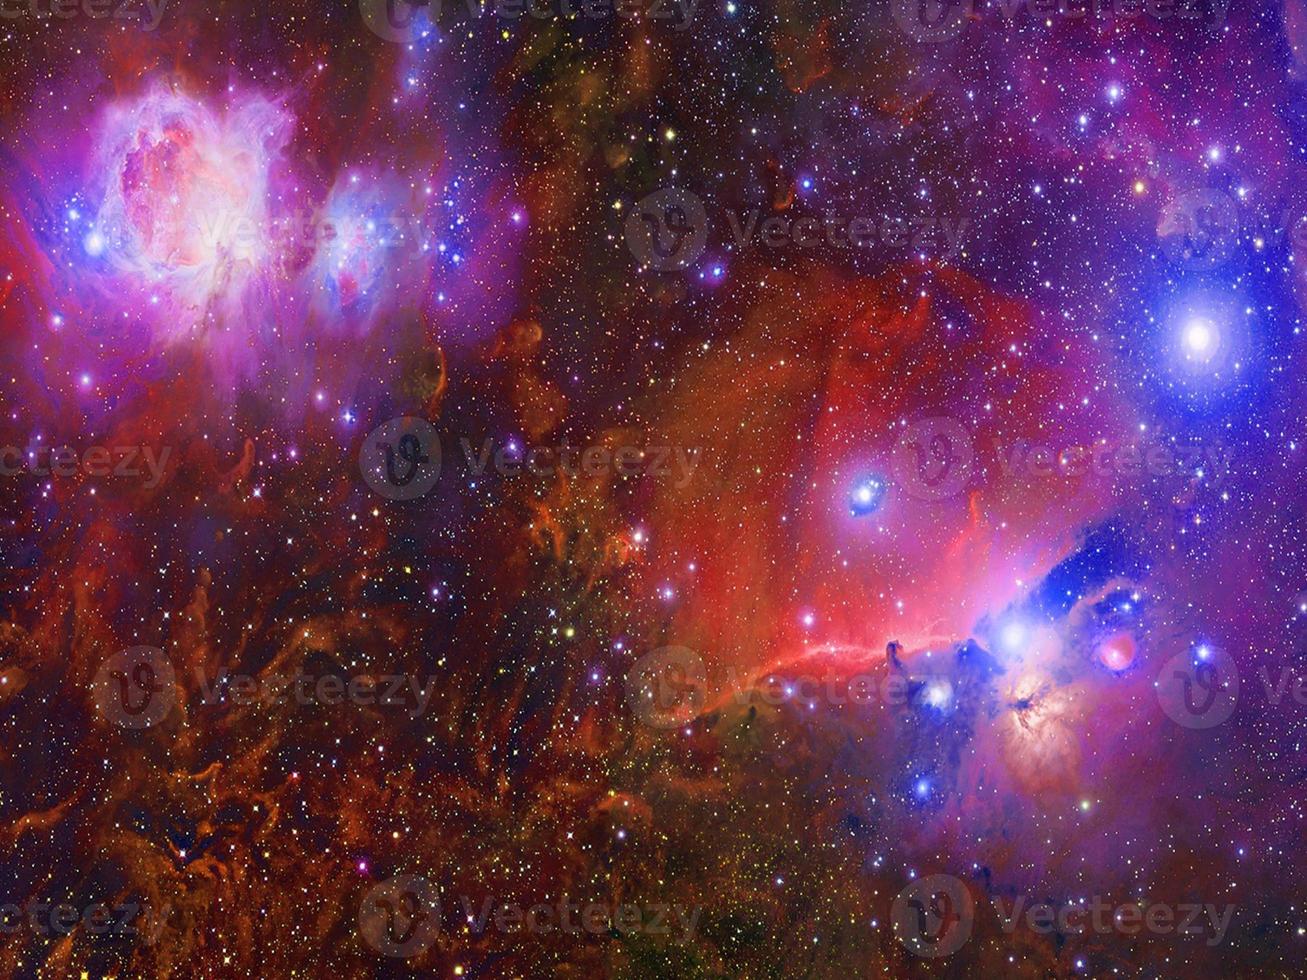 Infinite beautiful cosmos dark red and light blue background with nebula, cluster of stars in outer space. Beauty of endless Universe filled stars.Cosmic art, science fiction wallpaper photo